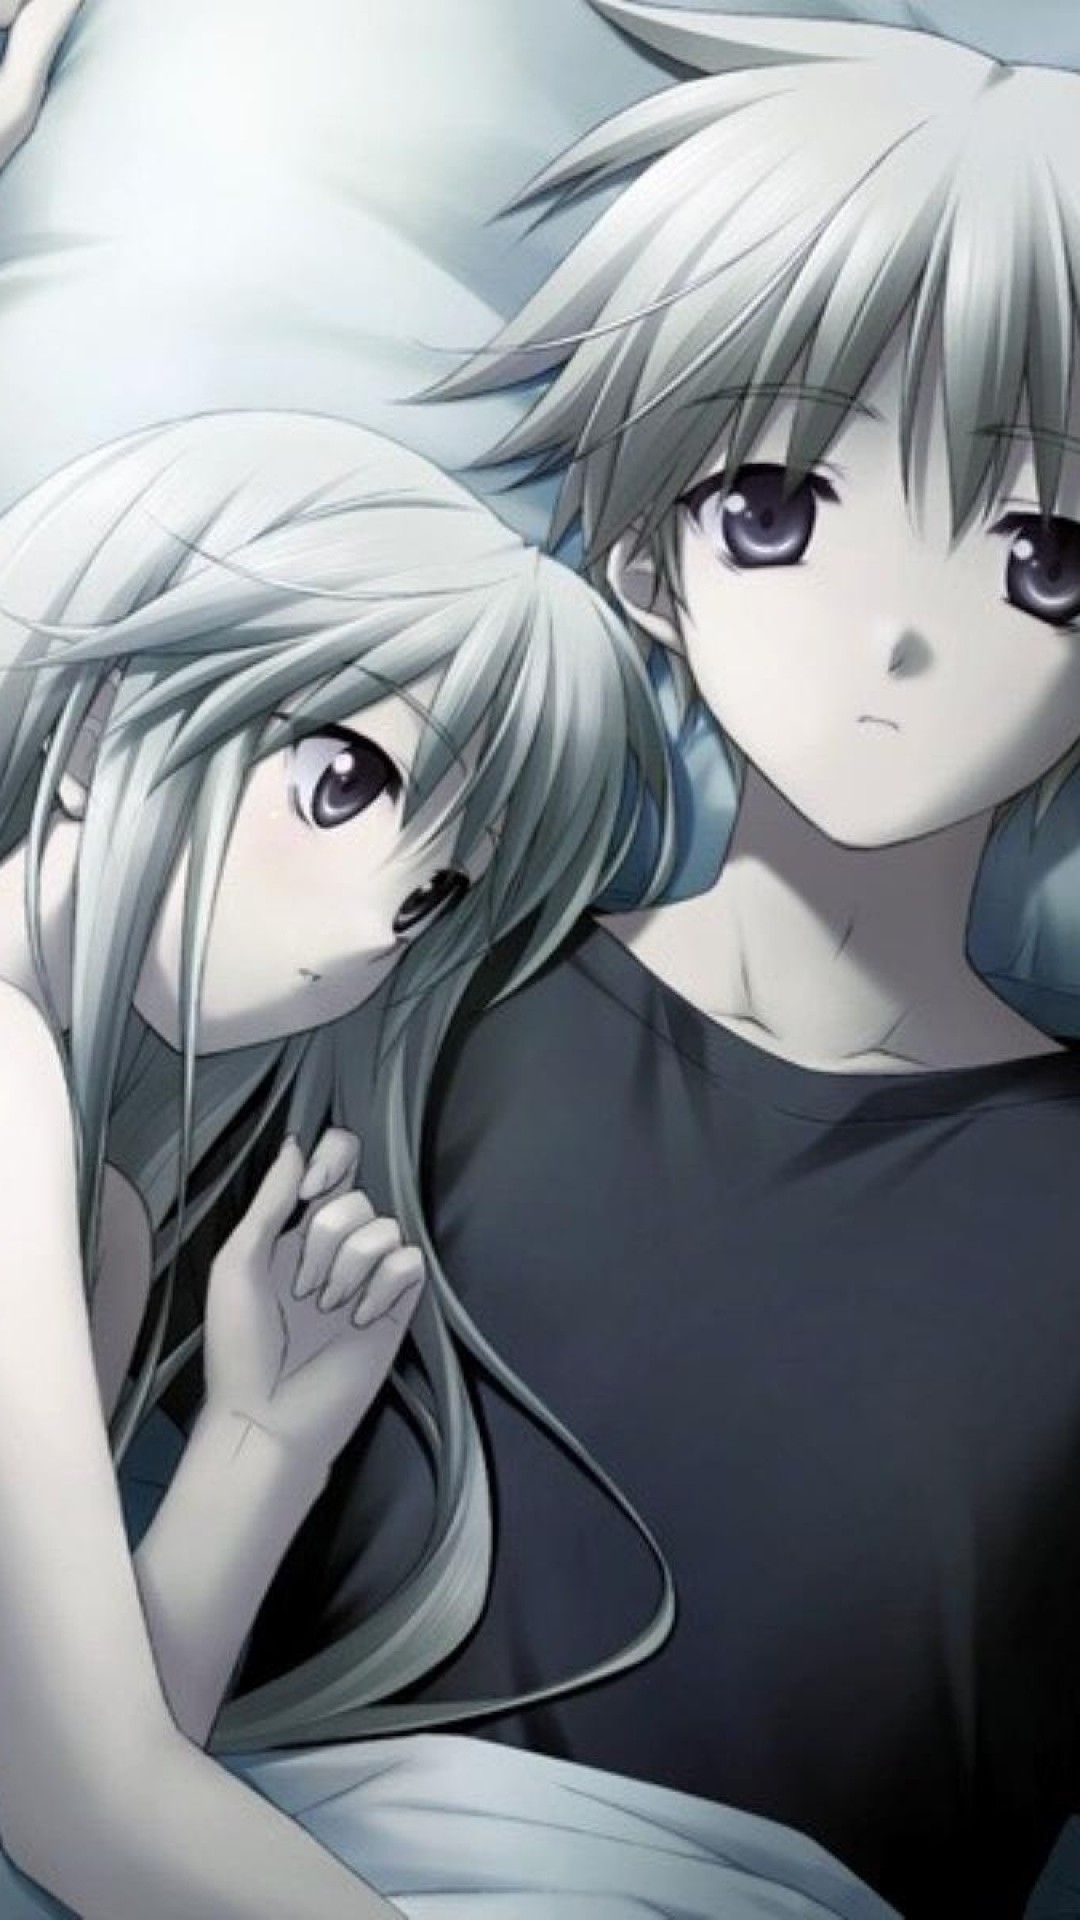 640x1136 Resolution Anime Romantic Couple 2019 iPhone 55c5SSE Ipod  Touch Wallpaper  Wallpapers Den